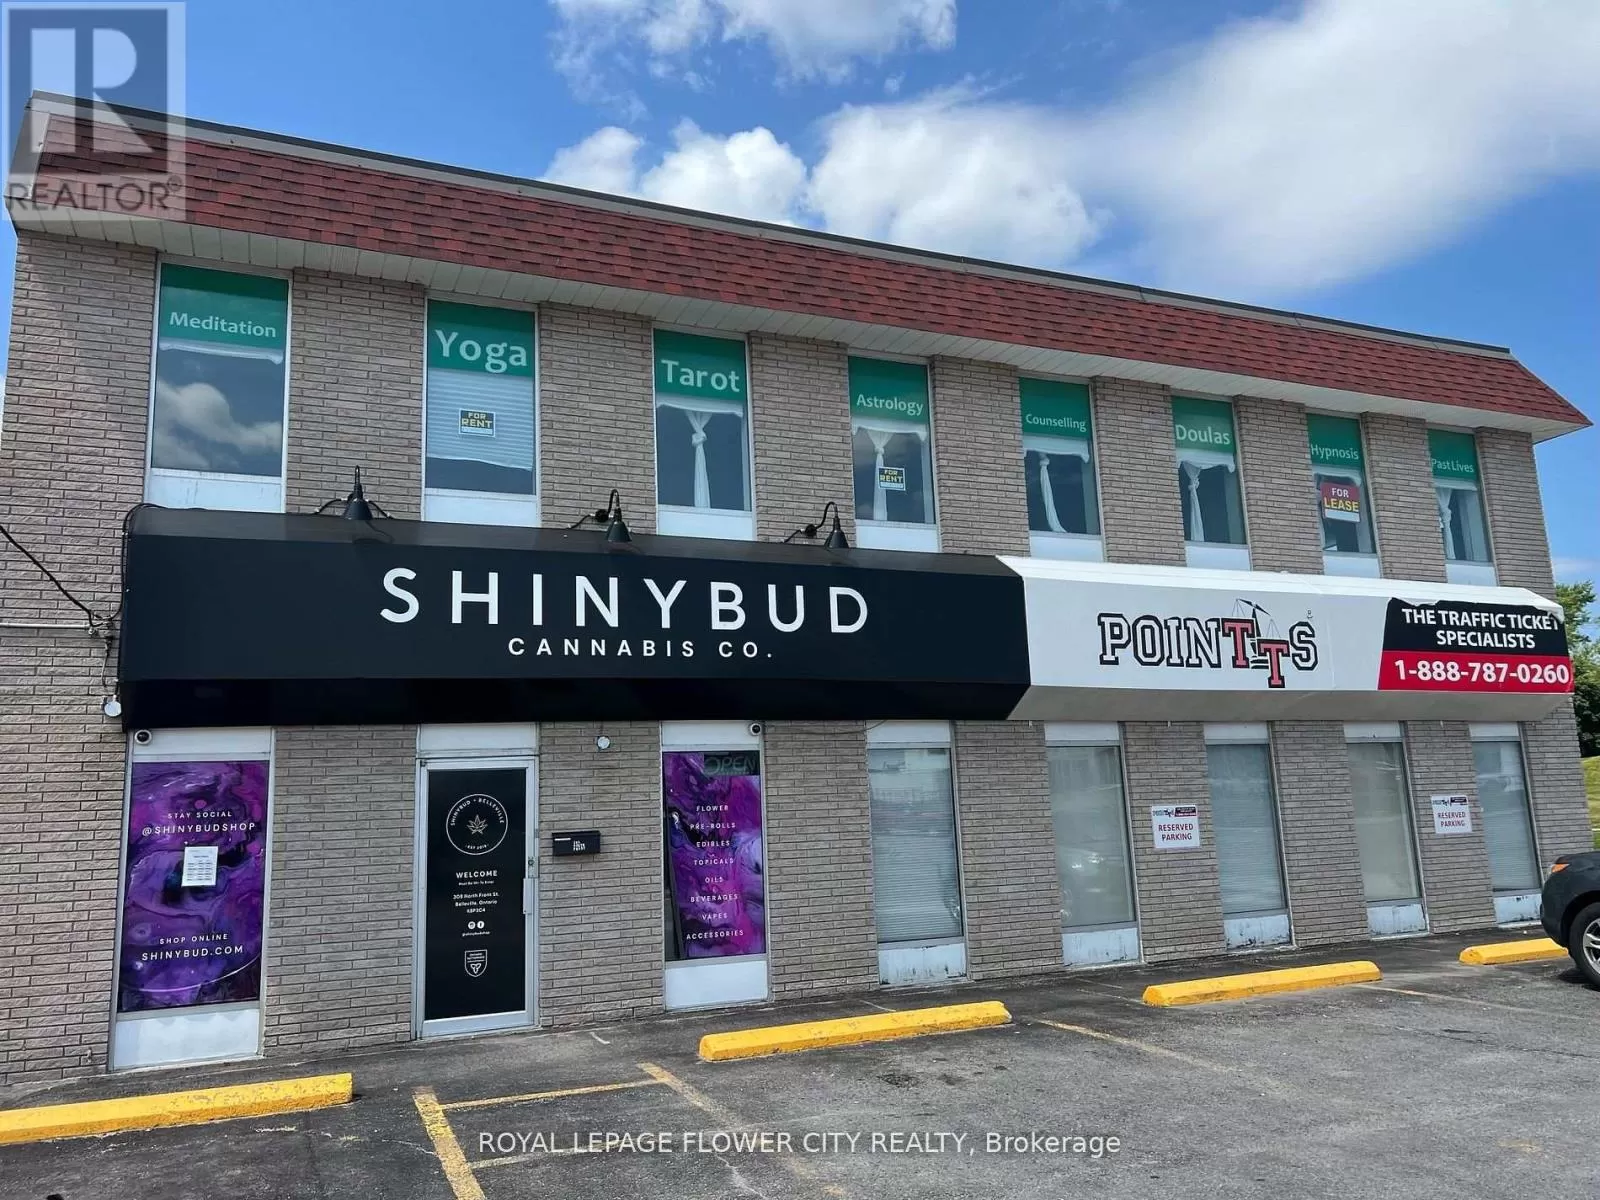 Offices for rent: #201 -308 North Front St, Belleville, Ontario K8P 3C4